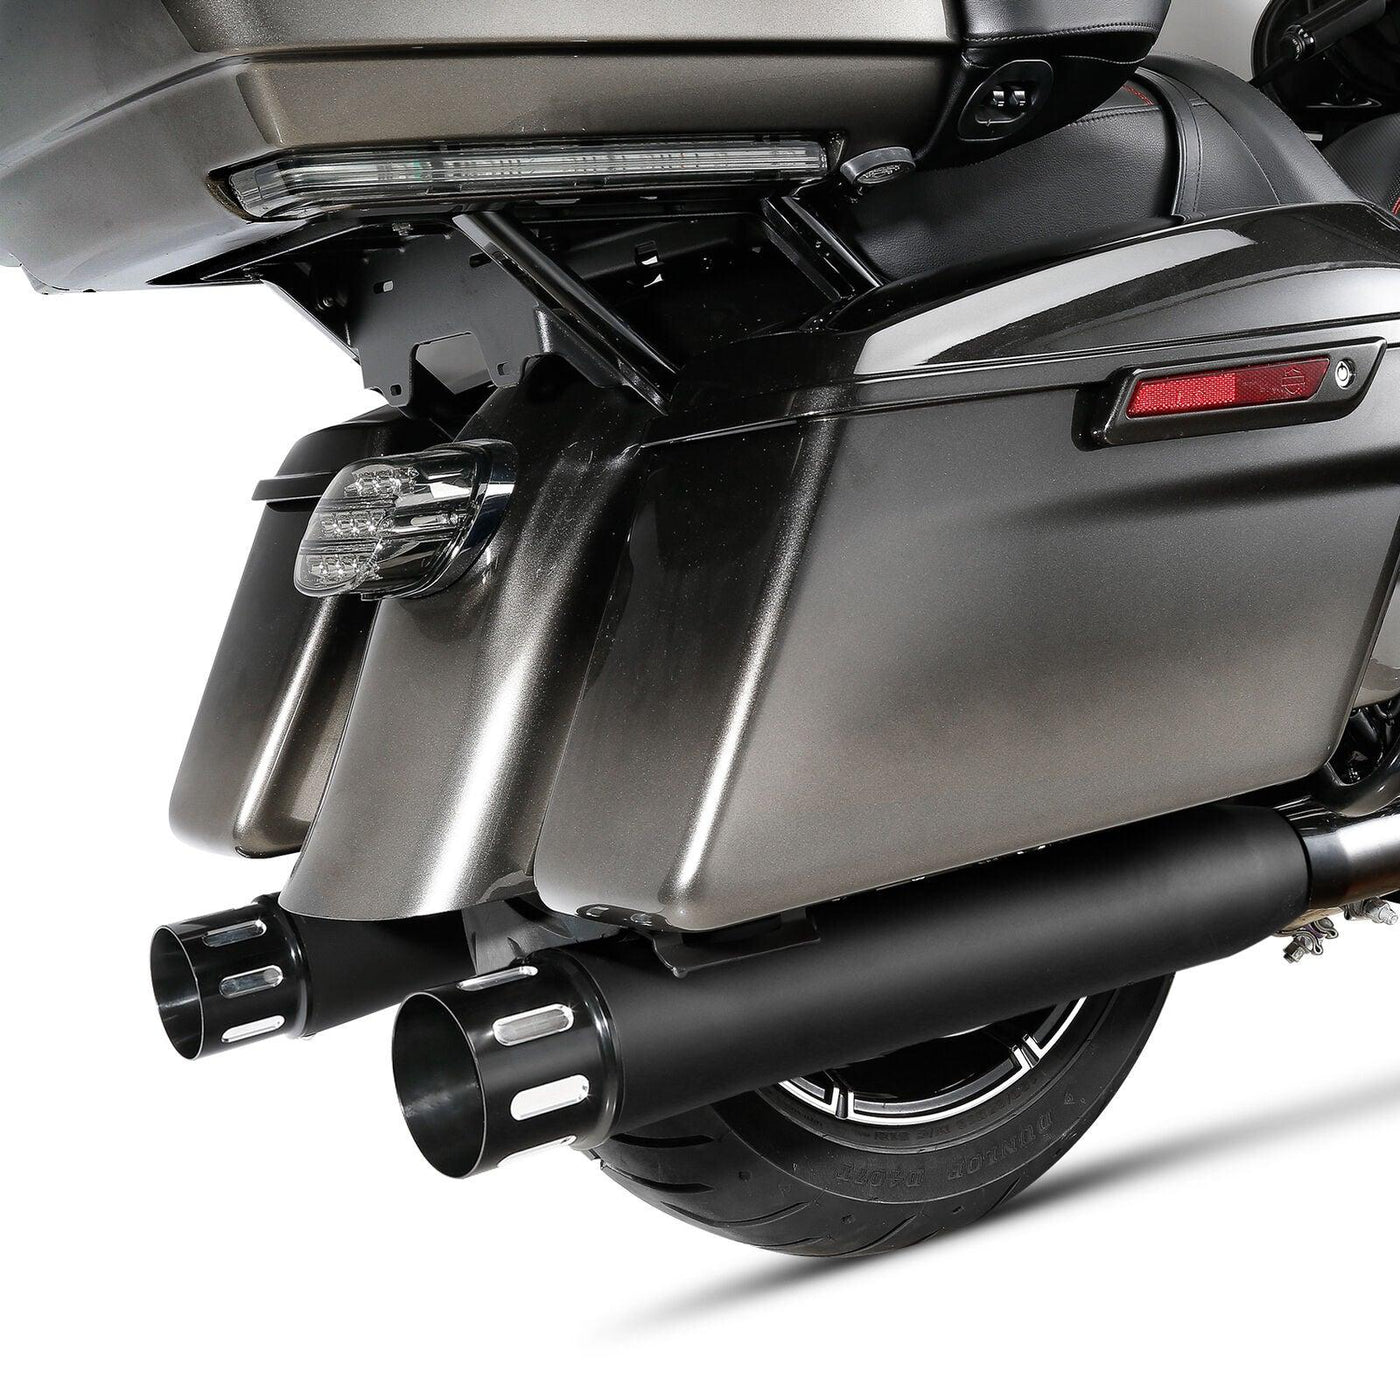 Black Slip On Dual Exhaust Mufflers Pipes Fit For Harley Electra Glide 17-22 19 - Moto Life Products